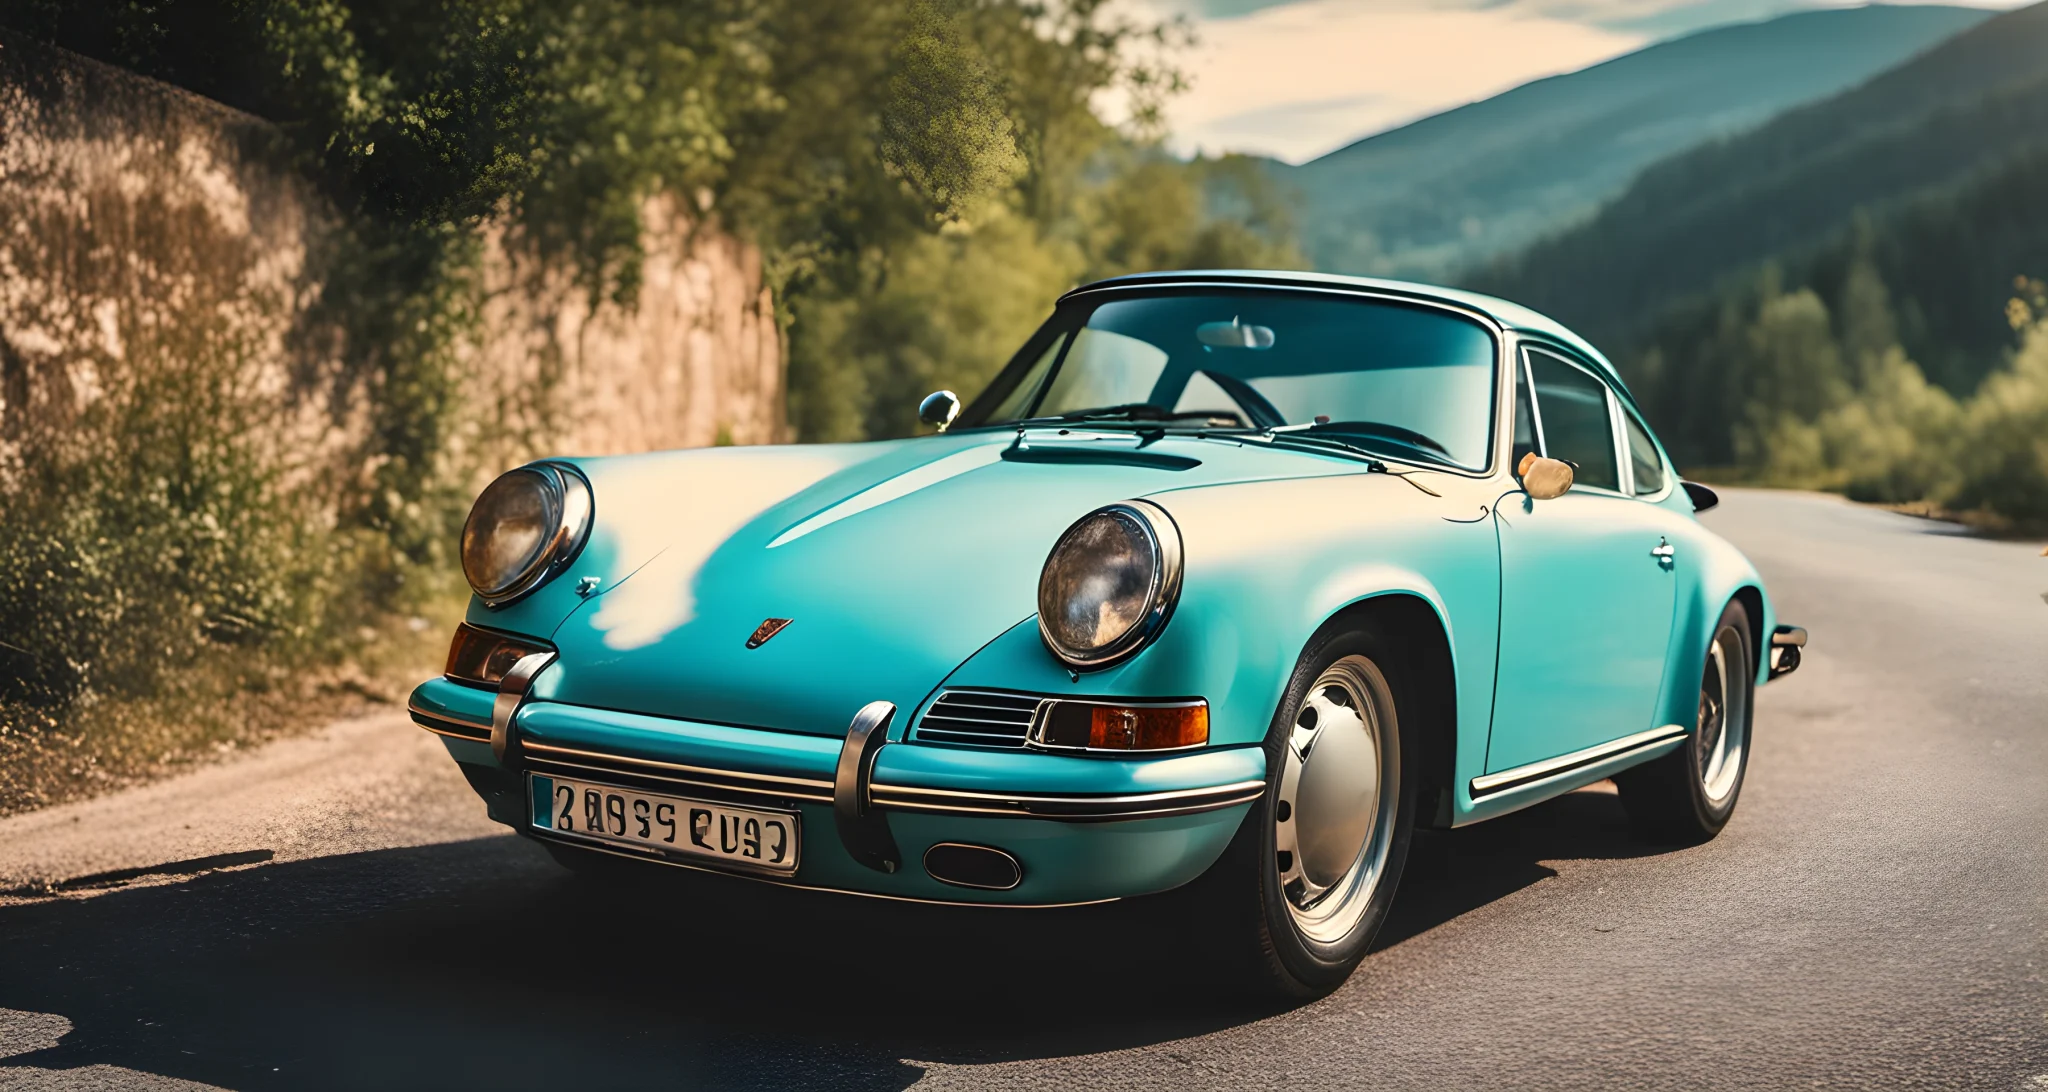 The image shows a vintage Porsche sports car parked on a winding road with a map and sunglasses on the dashboard.